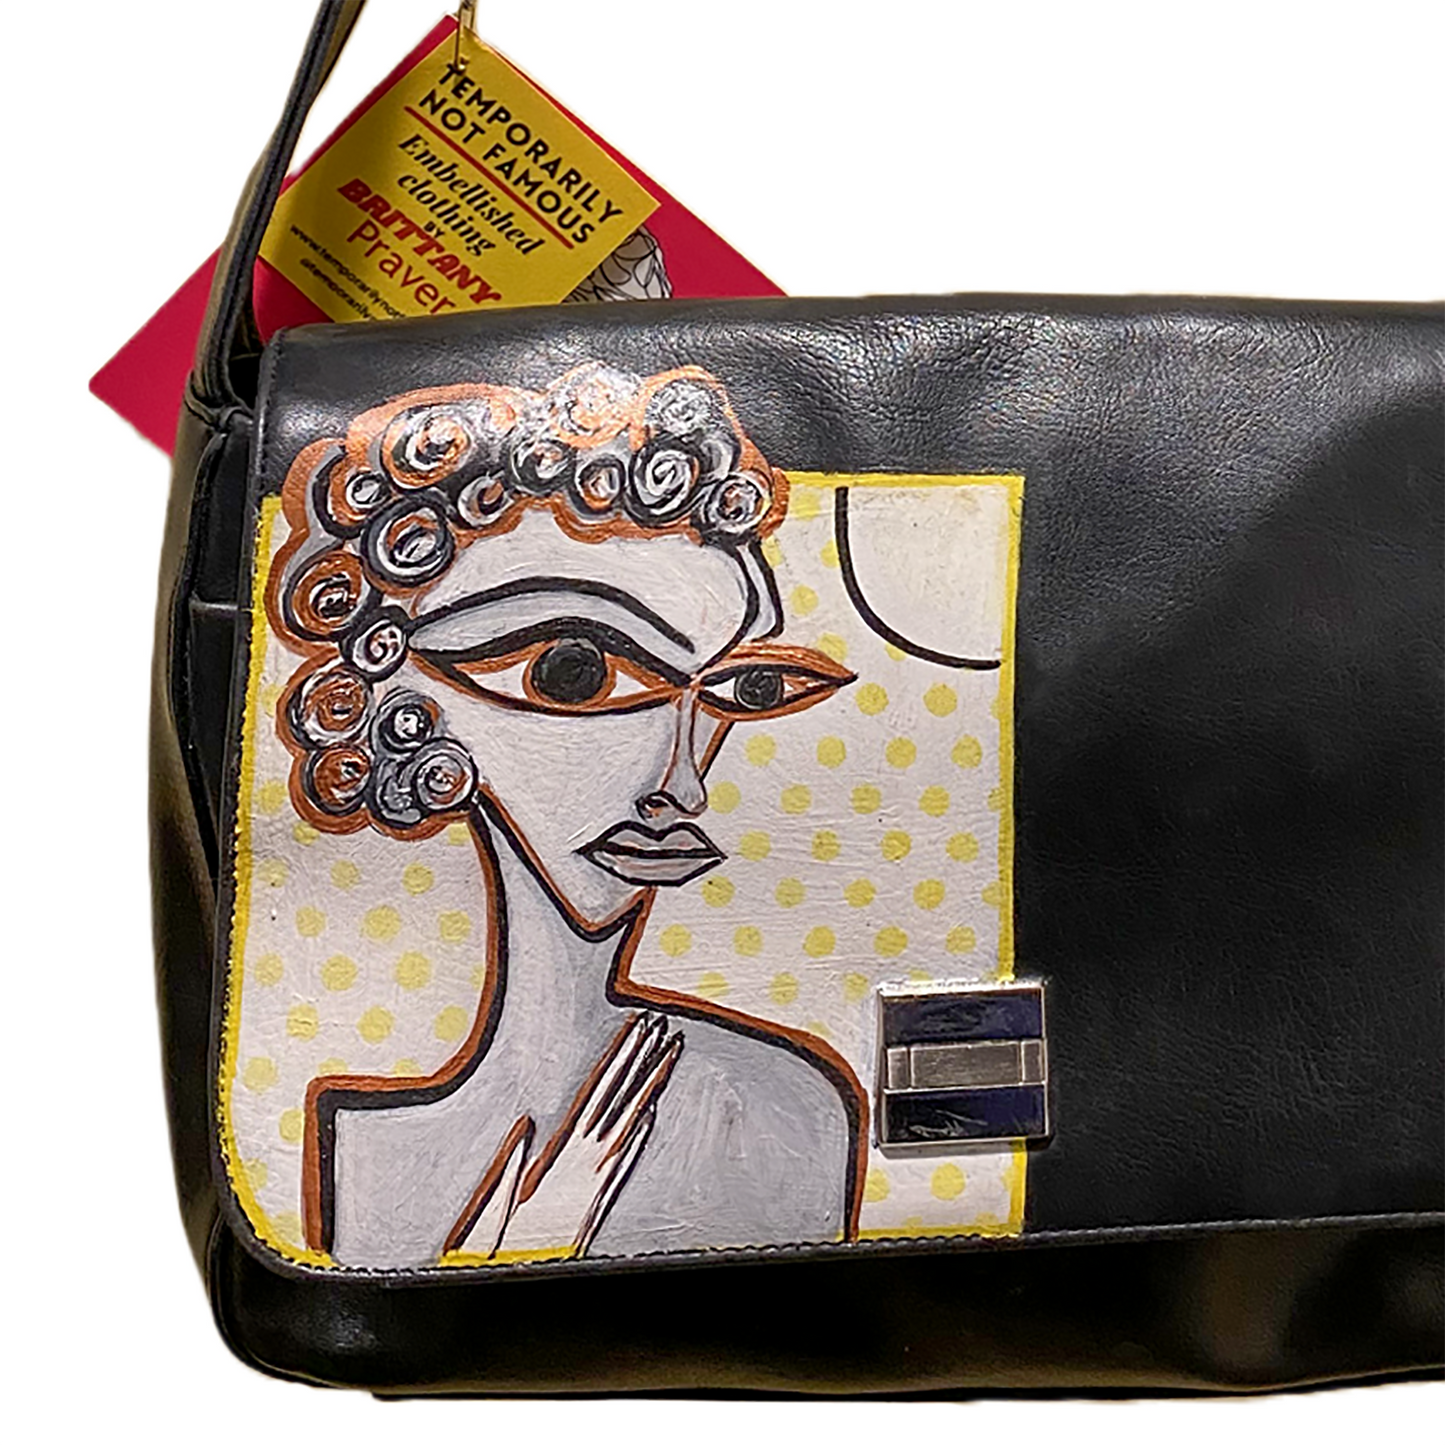 "Olivia" Black Leather Shoulder Bag Hand Painted - by Temporarily Not Famous